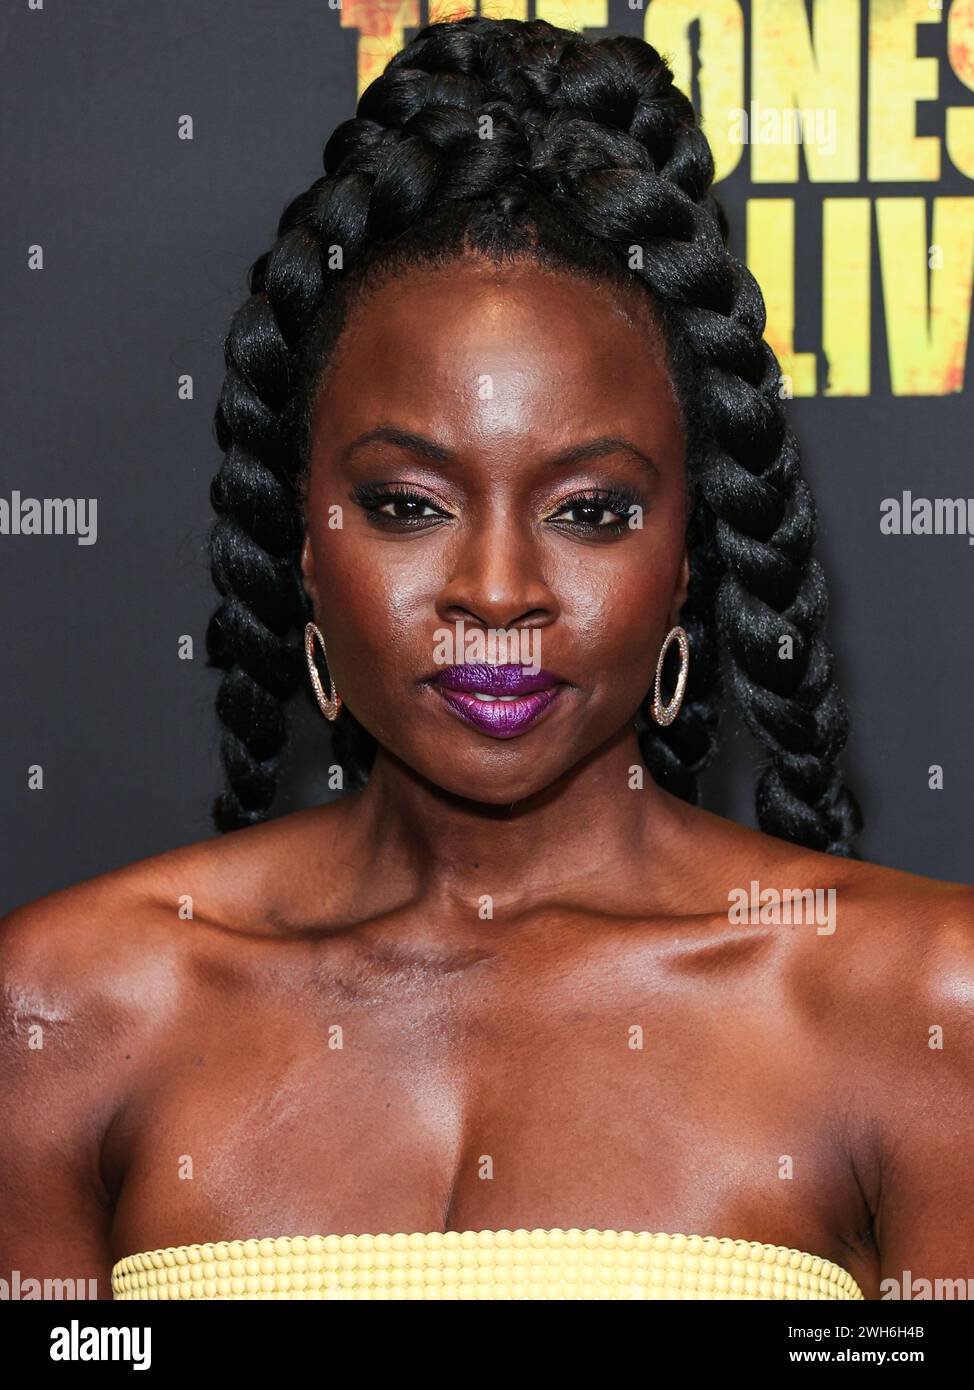 HOLLYWOOD, LOS ANGELES, KALIFORNIEN, USA - FEBRUAR 07: Danai Gurira kommt zur Los Angeles Premiere von AMC+'s The Walking Dead: the Ones Who Live' Staffel 1 fand am 7. Februar 2024 im Linwood Dunn Theater im Pickford Center for Motion Picture Study in Hollywood, Los Angeles, Kalifornien, USA statt. (Foto: Xavier Collin/Image Press Agency) Stockfoto